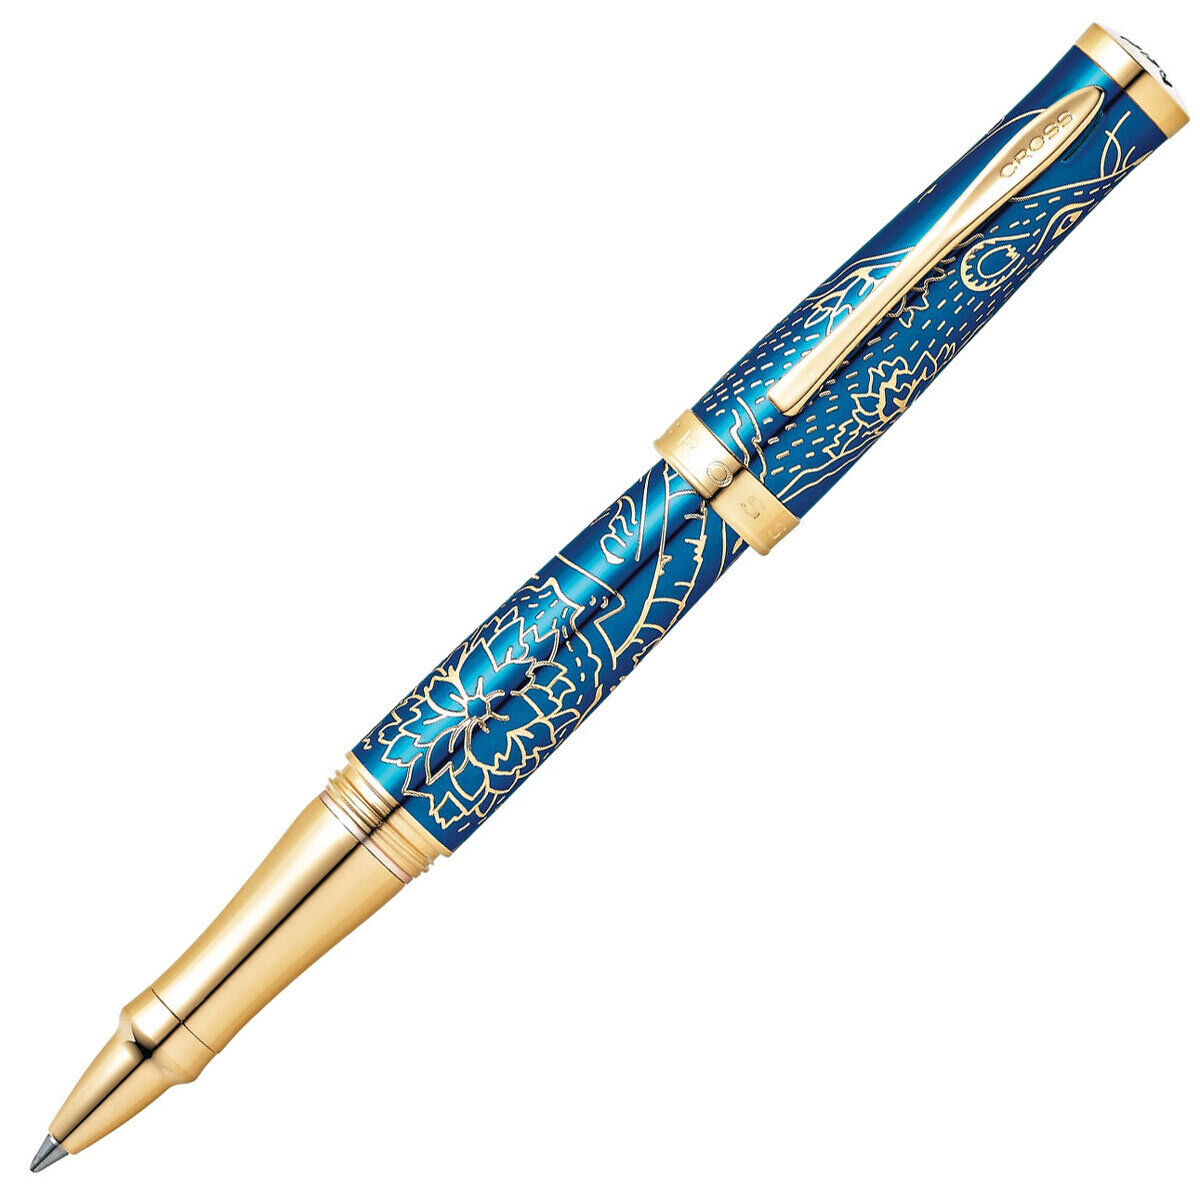 Cross Rollerball Pen Sauvage 2020 Year Of The Rat Brass Snap On Cap At0315-23